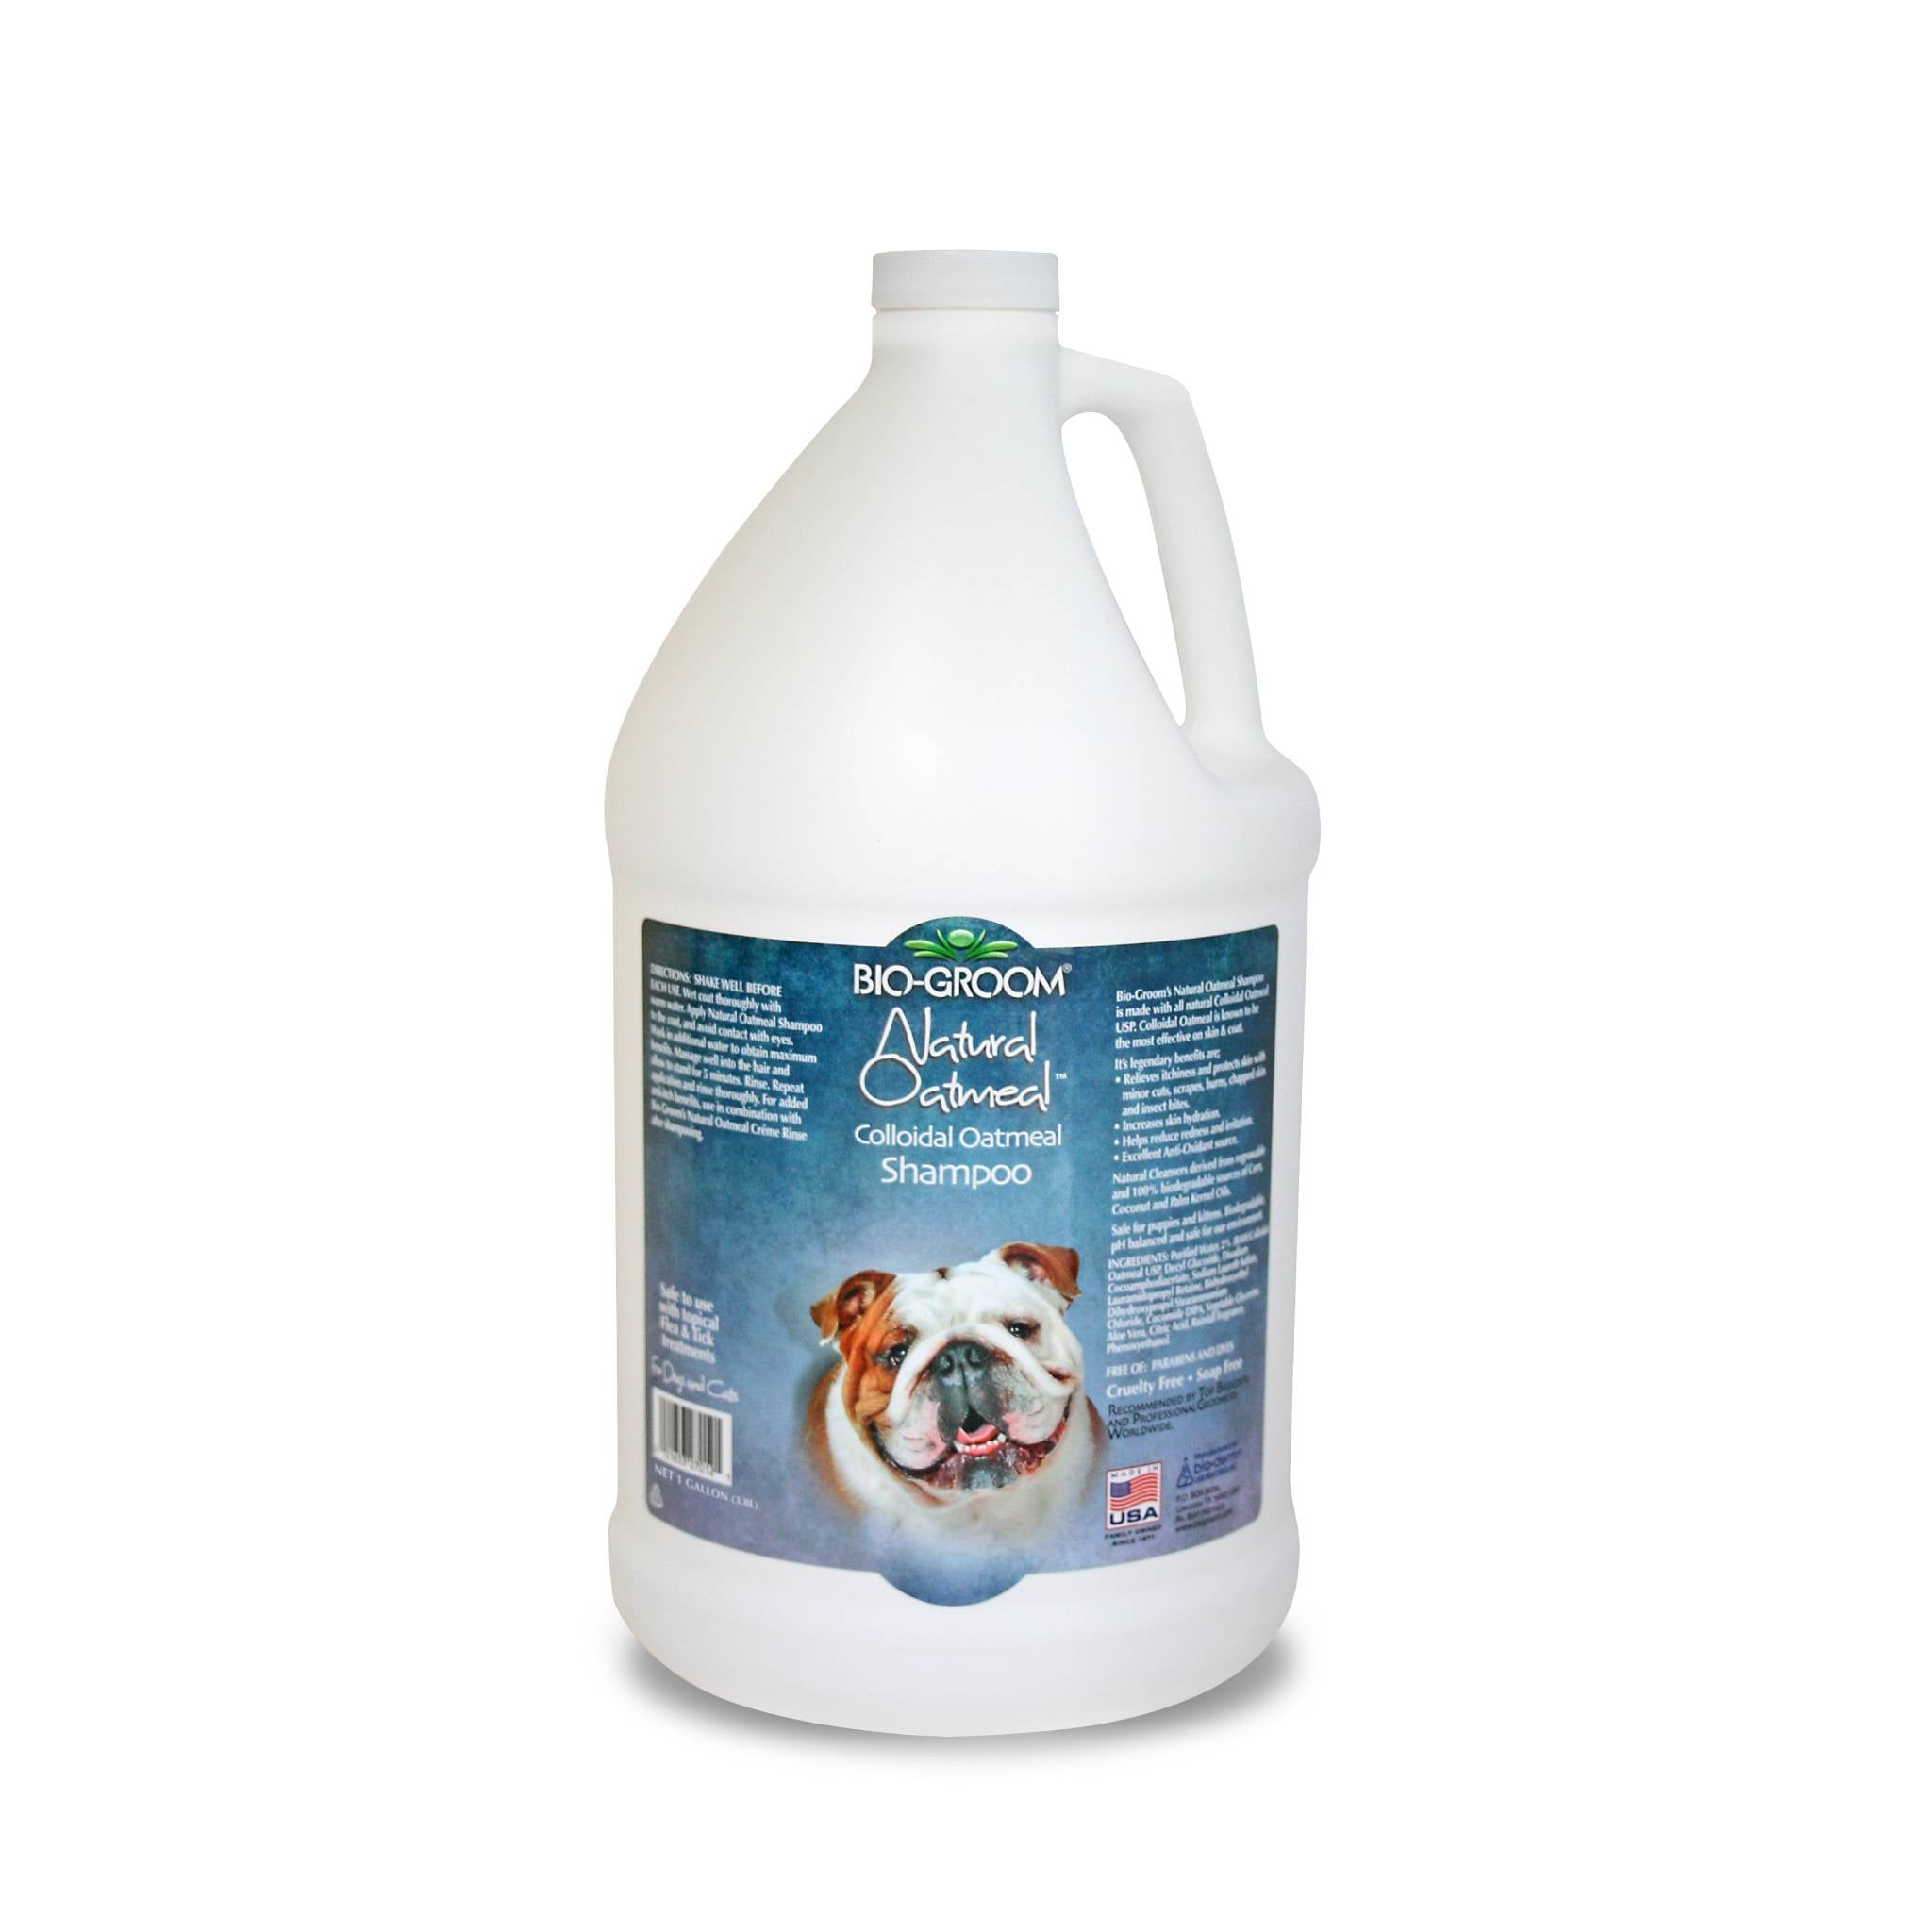 Bio-Groom Natural Oatmeal Soothing Pet Shampoo for Cats and Dogs